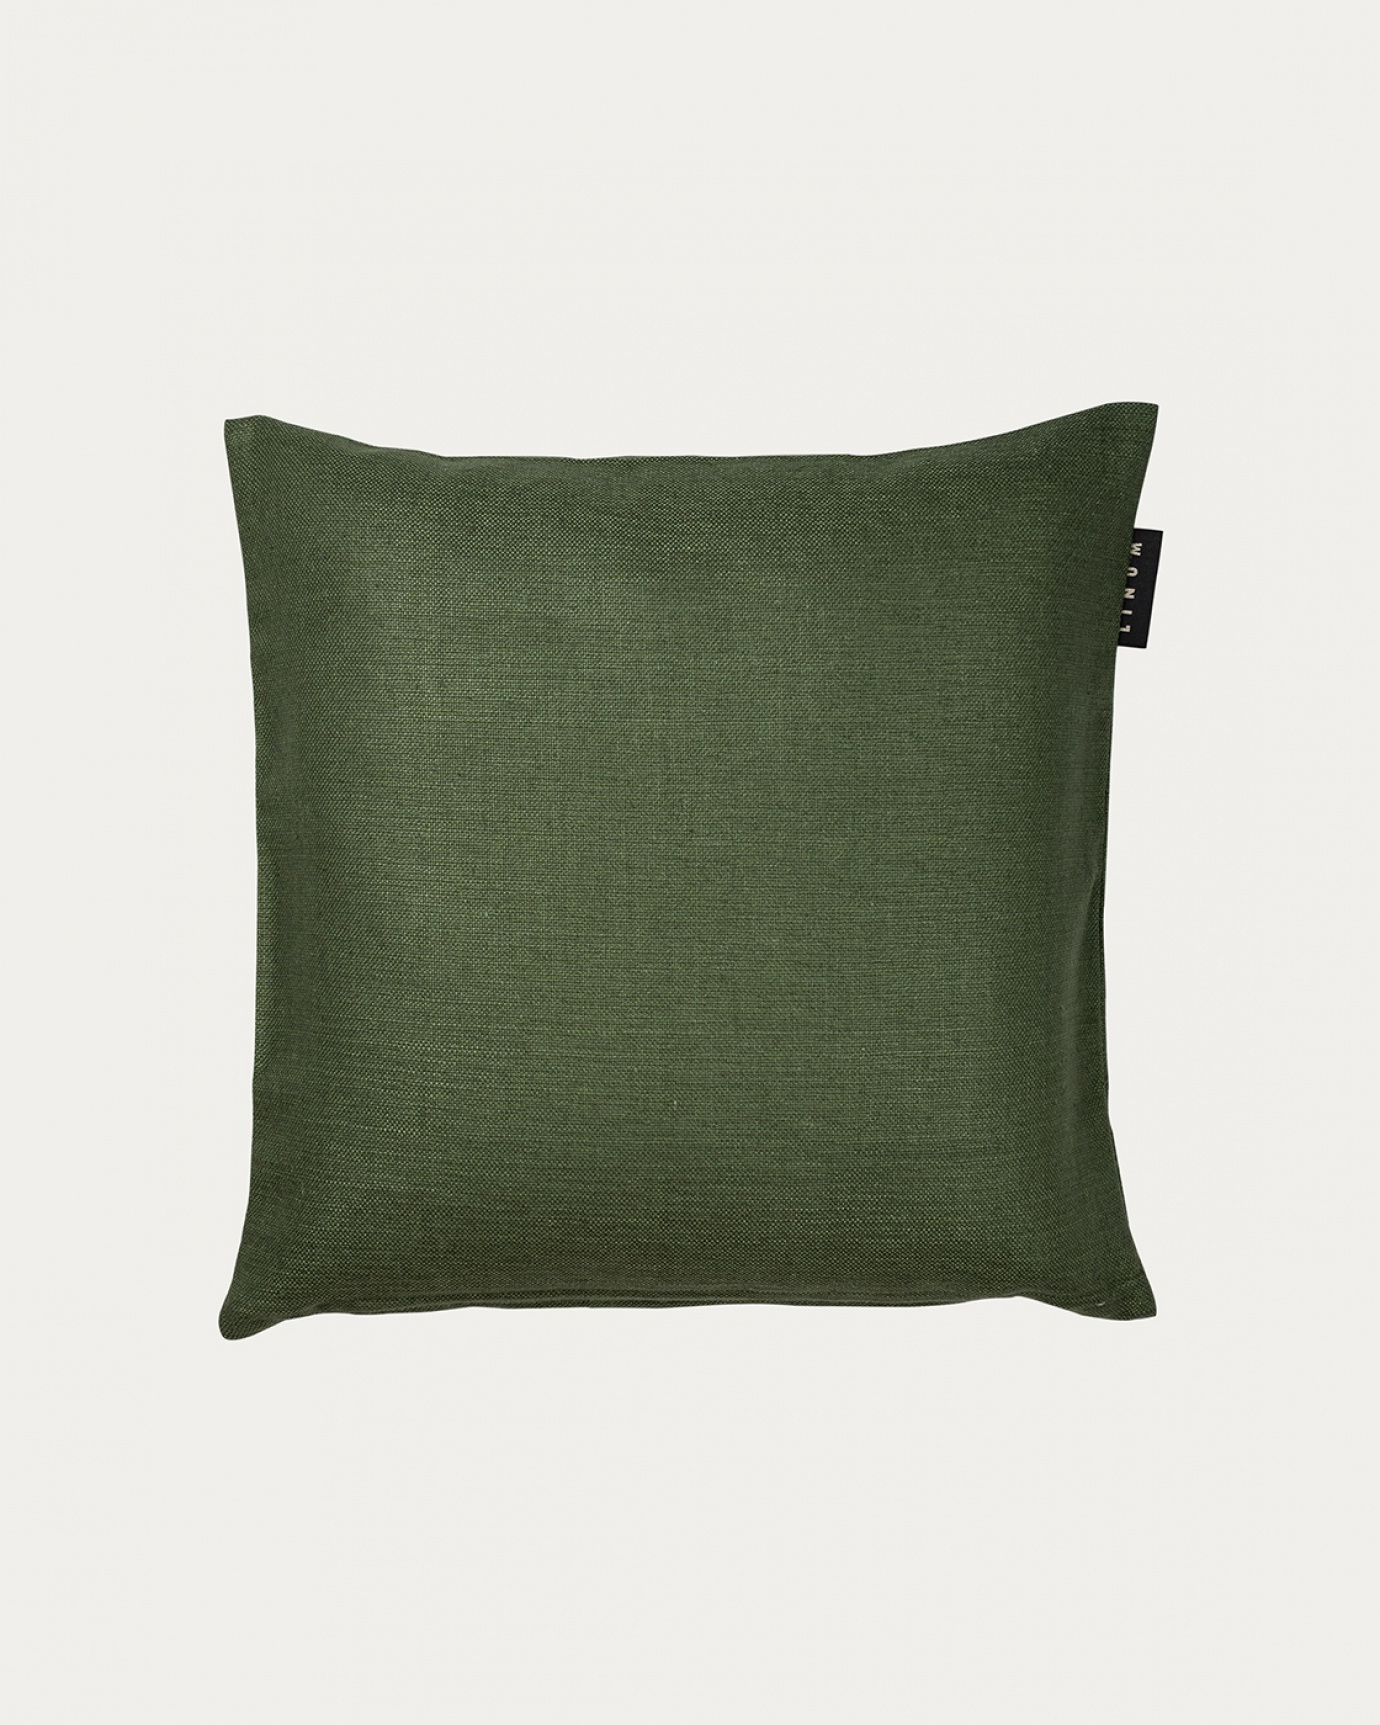 Product image dark olive green SETA cushion cover made of 100% raw silk that gives a nice lustre from LINUM DESIGN. Size 40x40 cm.